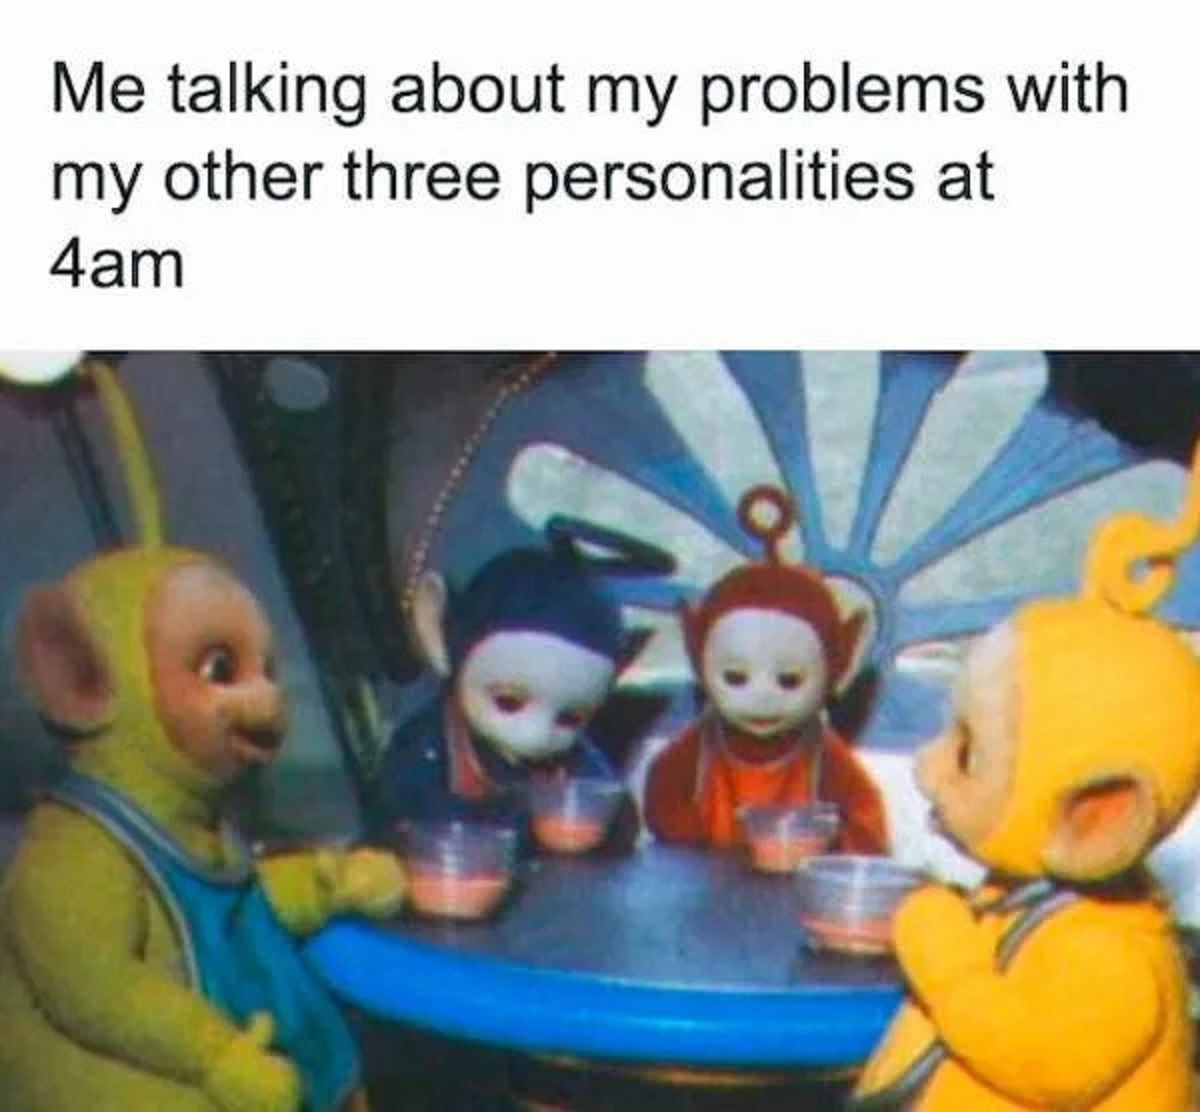 me talking about my problems with my other personalities - Me talking about my problems with my other three personalities at 4am